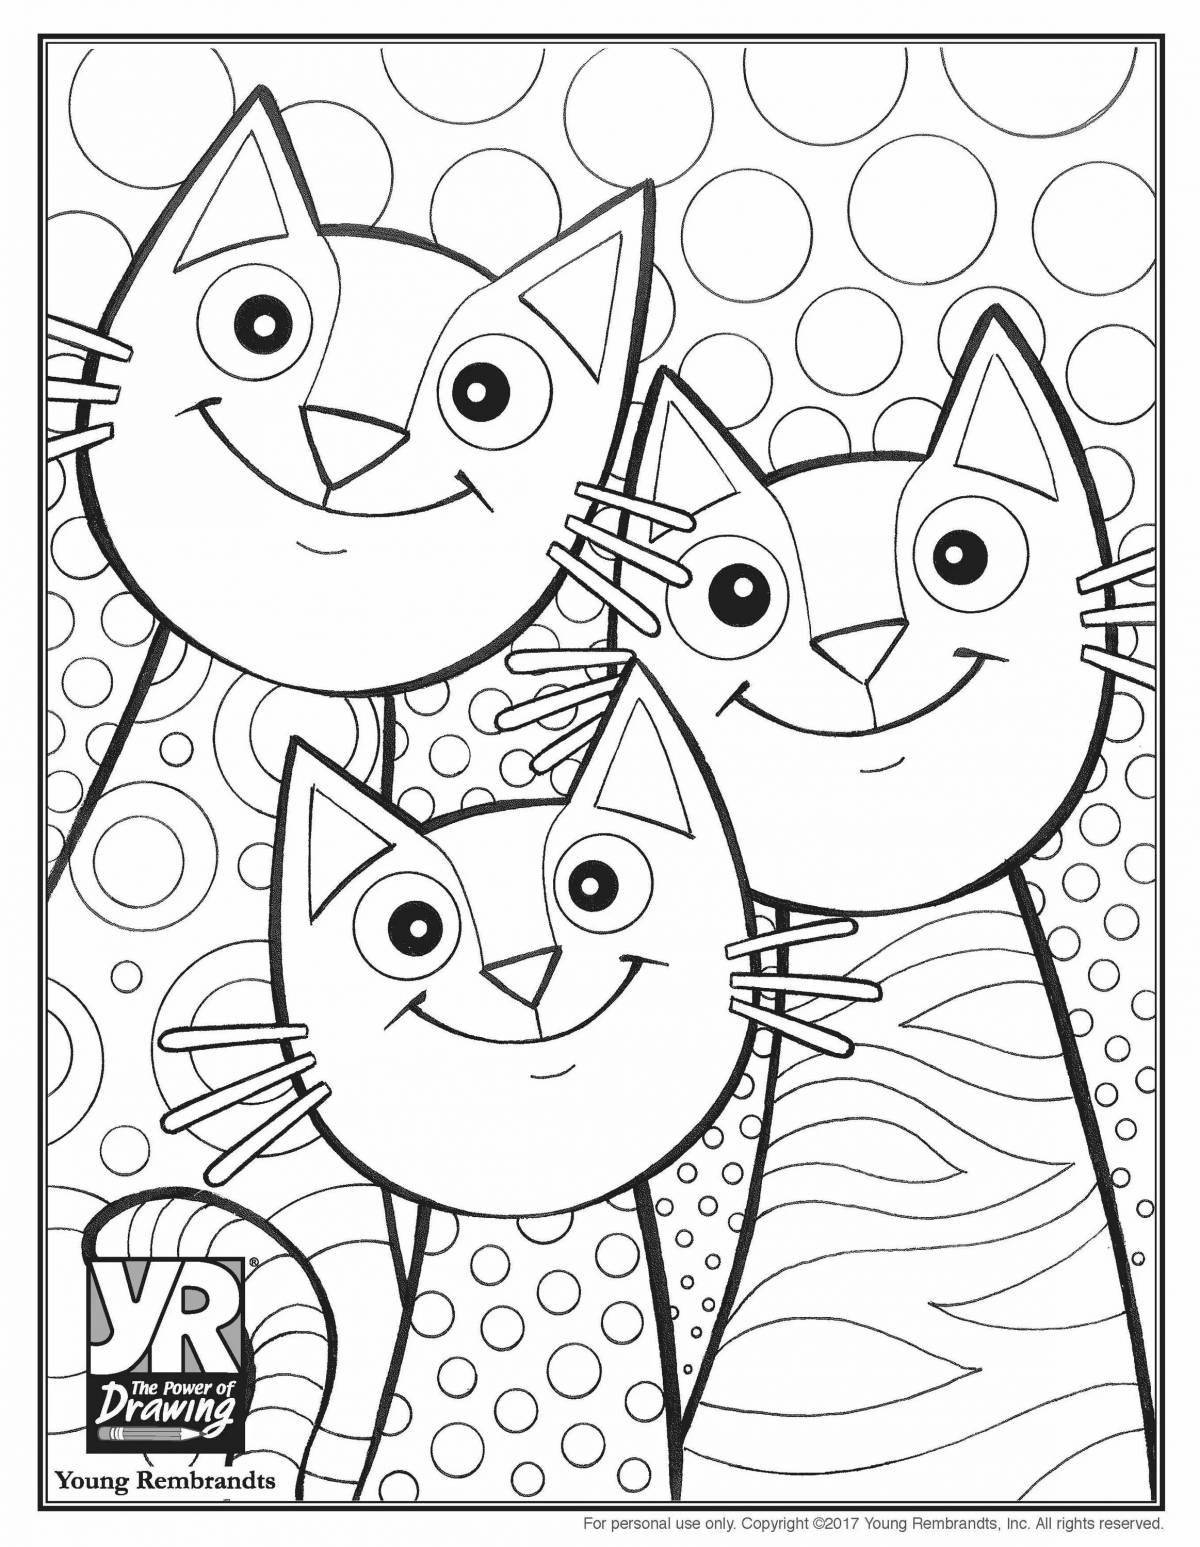 Fancy cat breed coloring book